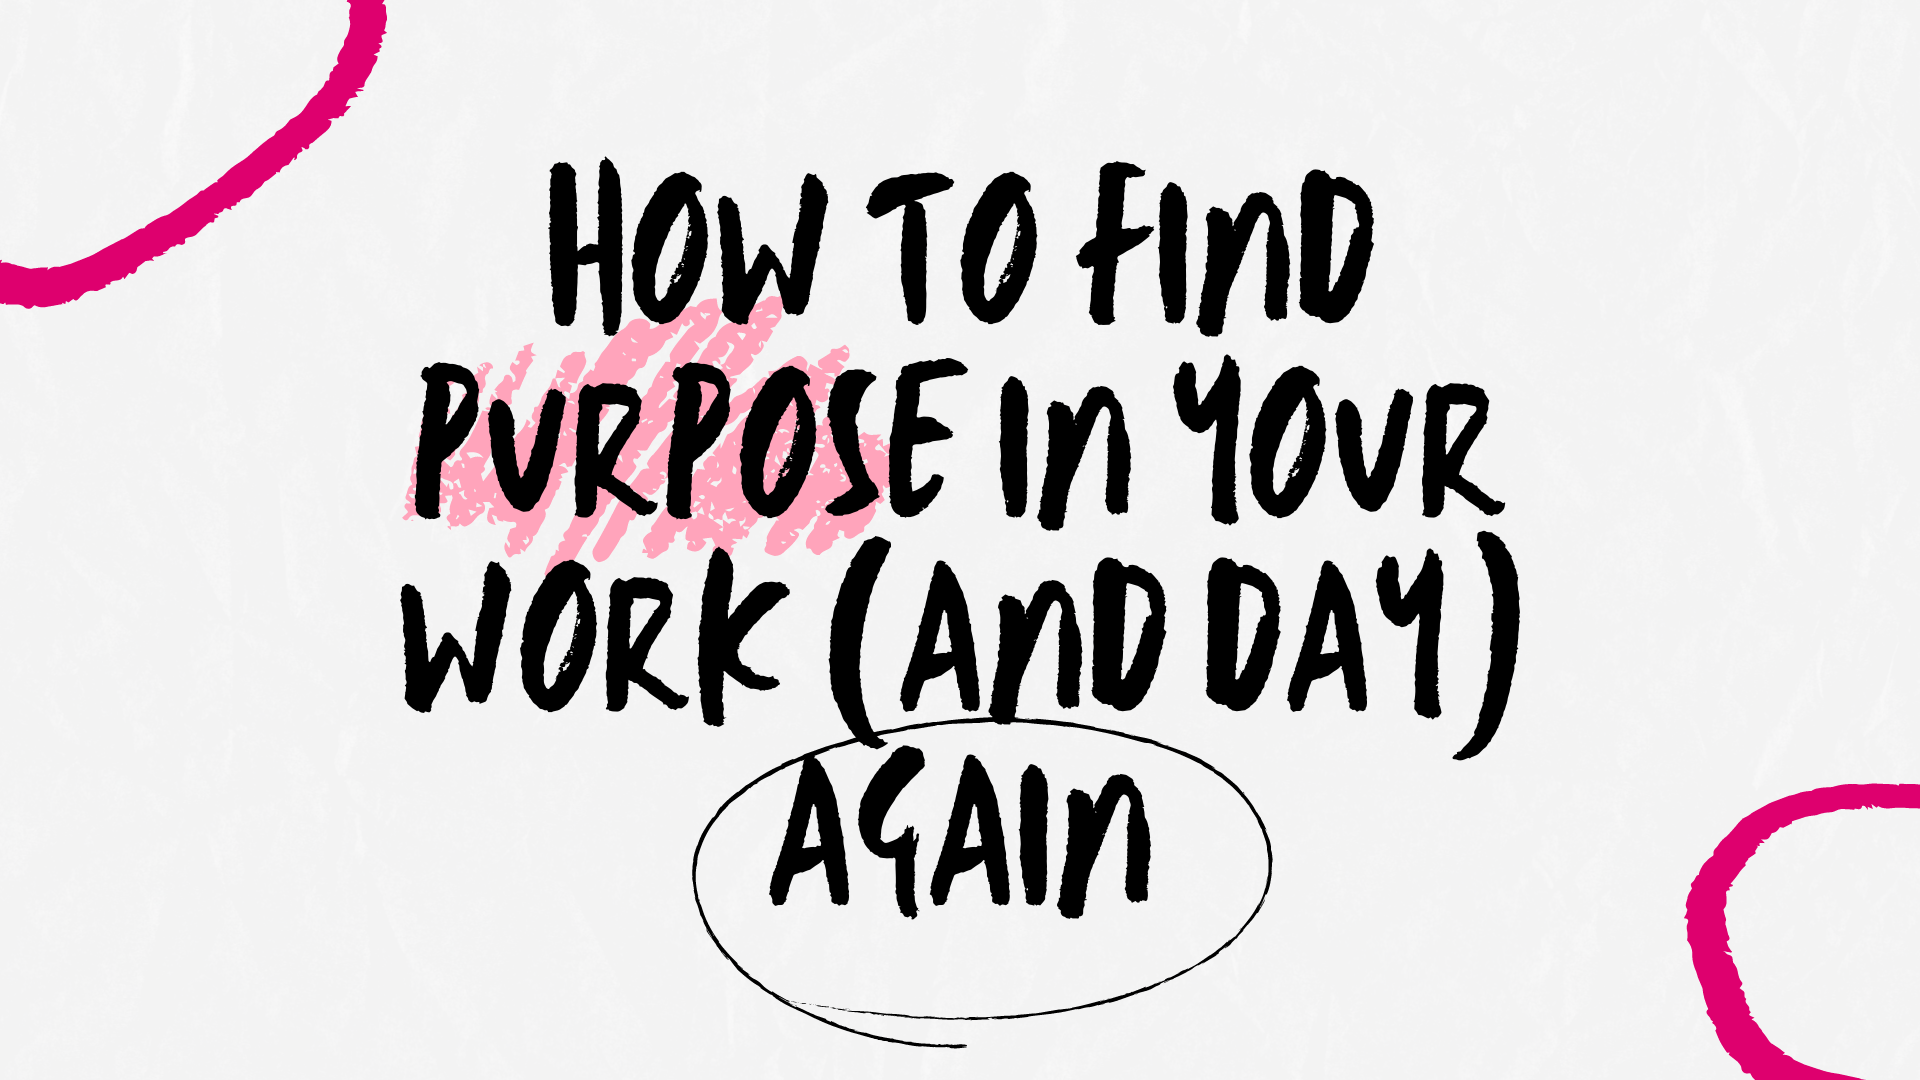 How to find purpose in your work (and day) again